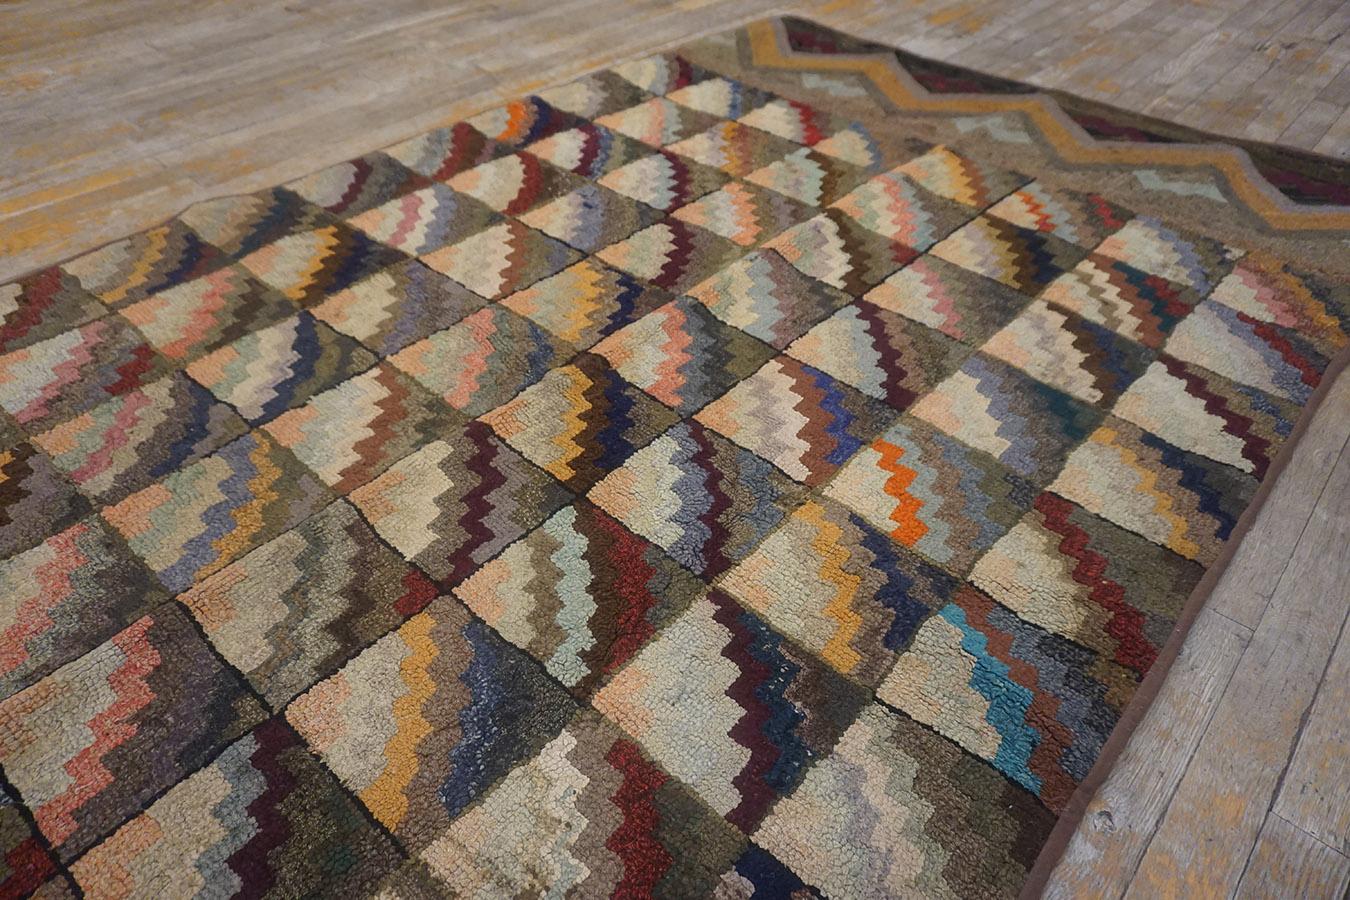 Early 20th Century American Hooked Rug ( 4'4